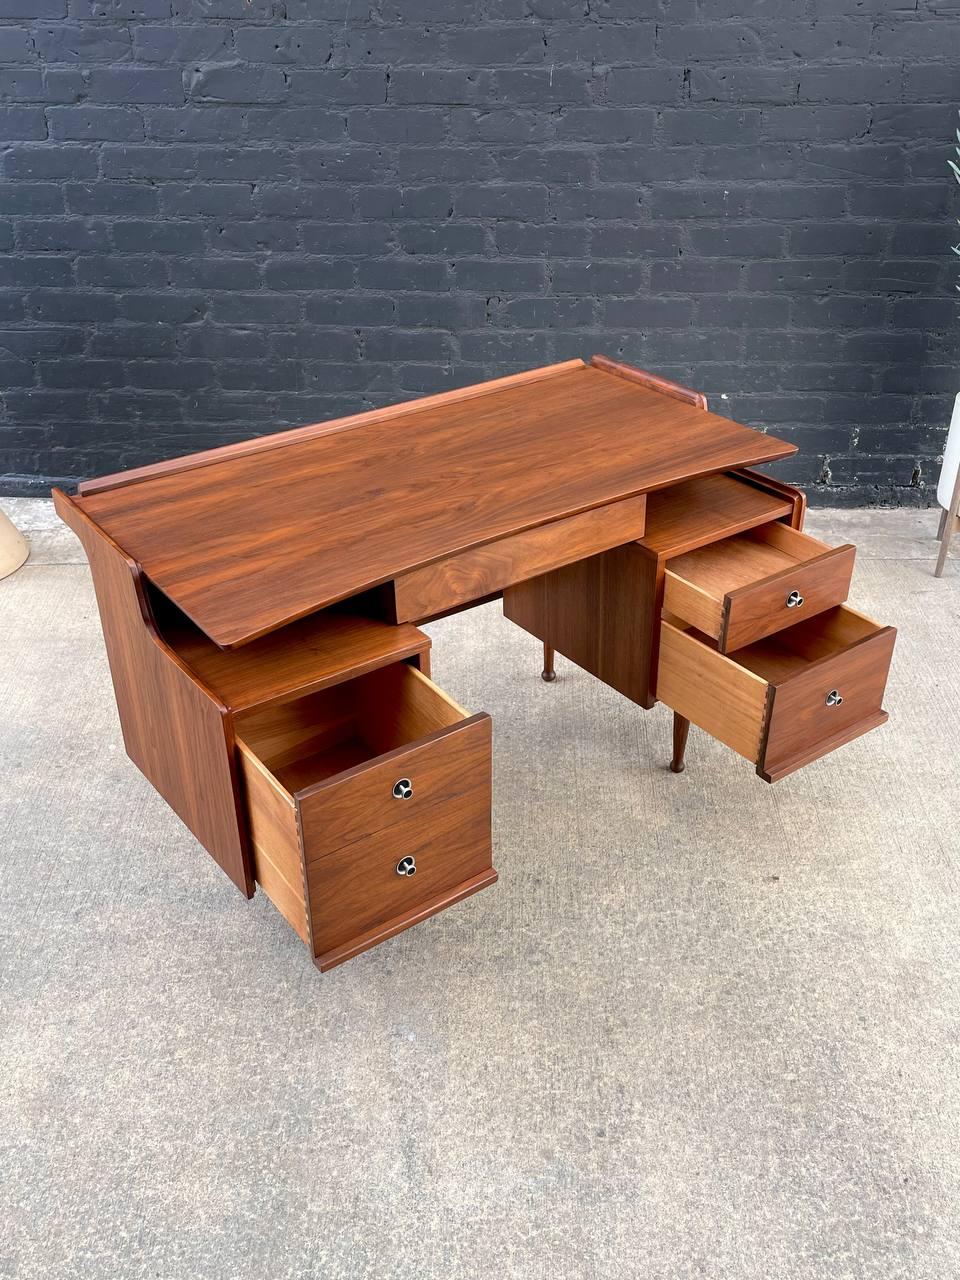 Newly Refinished - Mid-Century Modern Sculpted Walnut Desk by Hooker In Excellent Condition For Sale In Los Angeles, CA